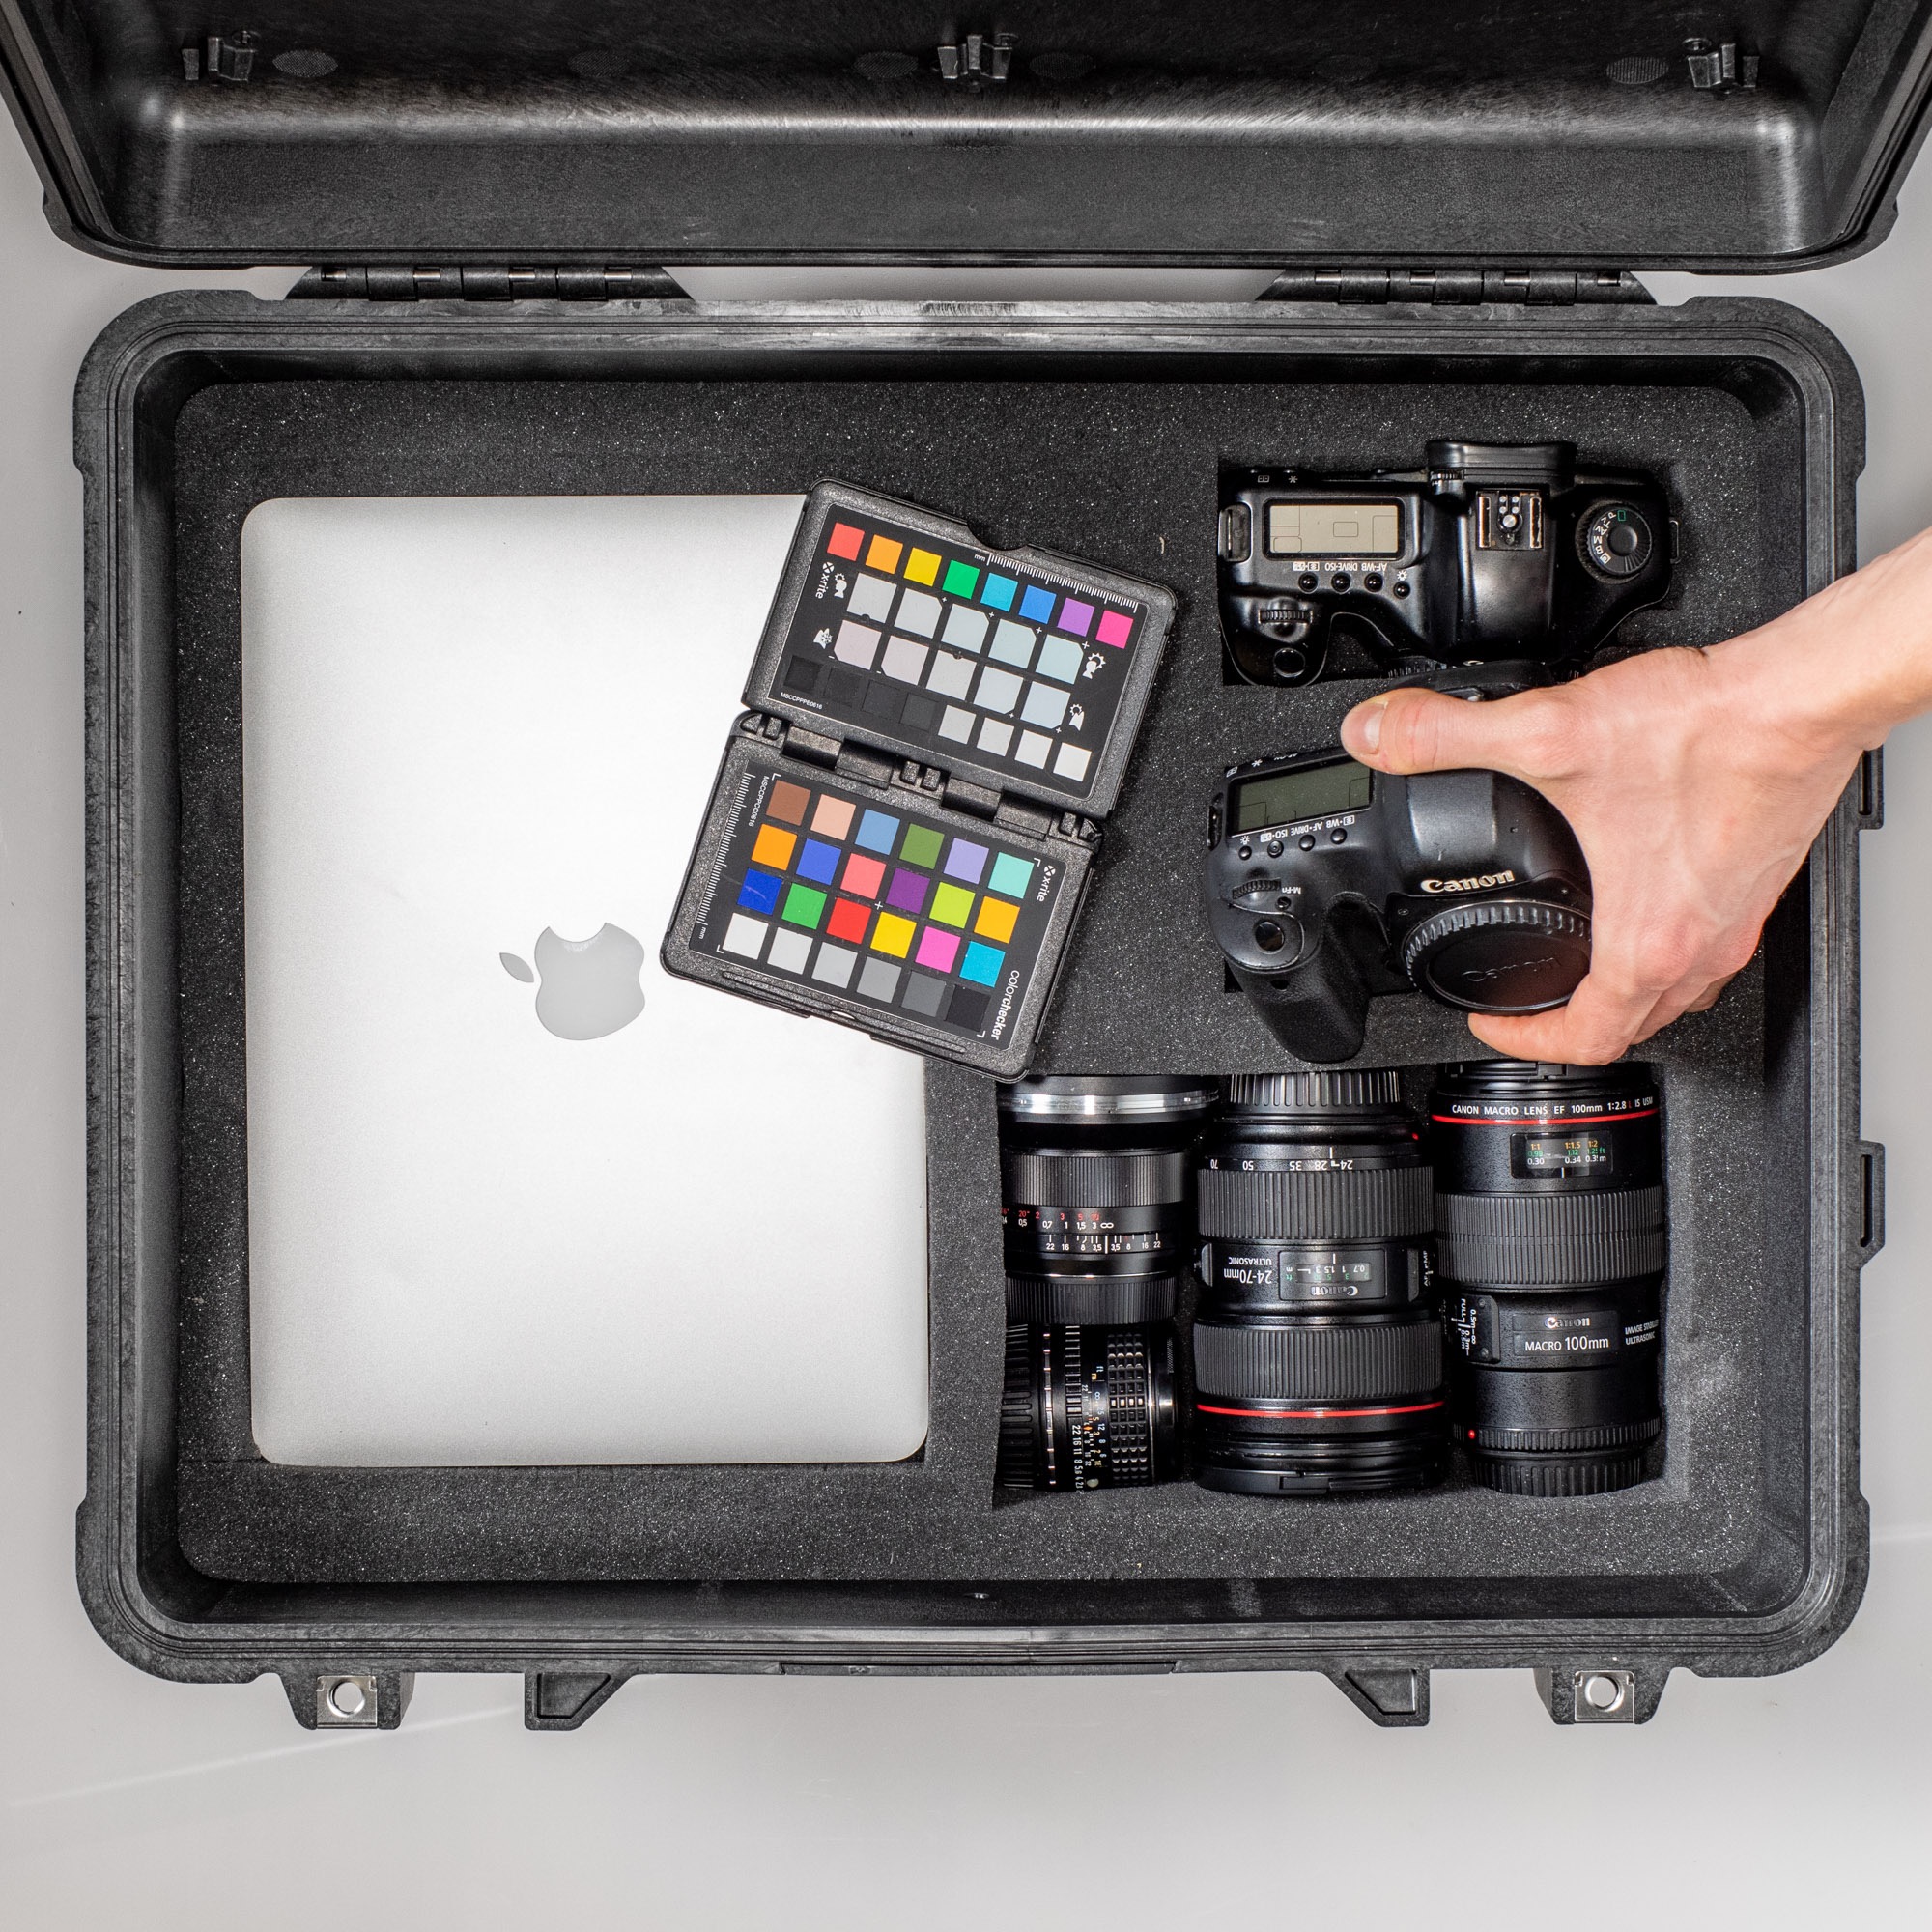 The photo equipment that Will uses